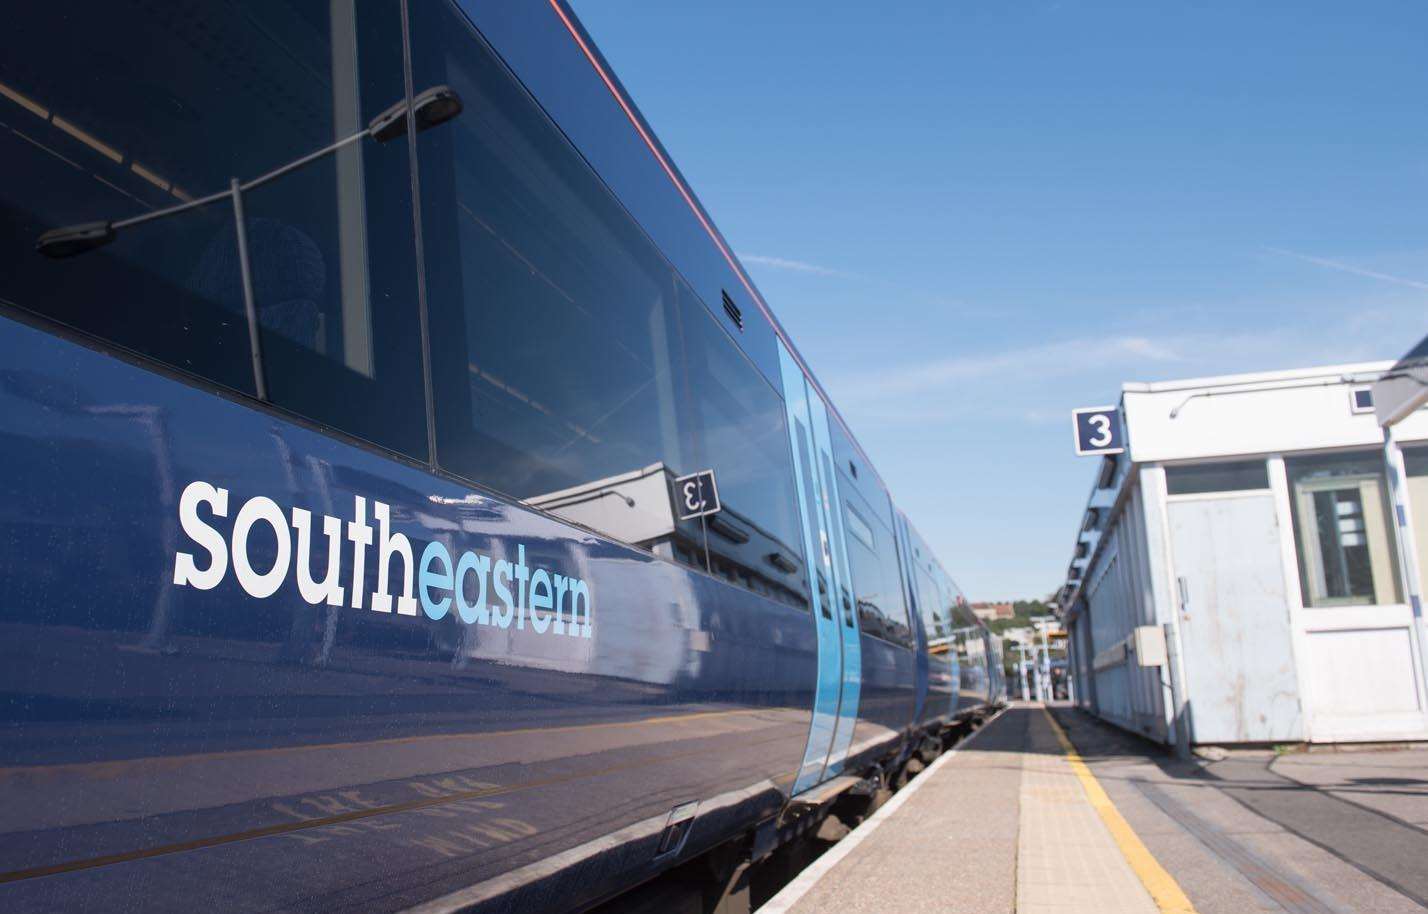 Southeastern has announced changes to some of its services